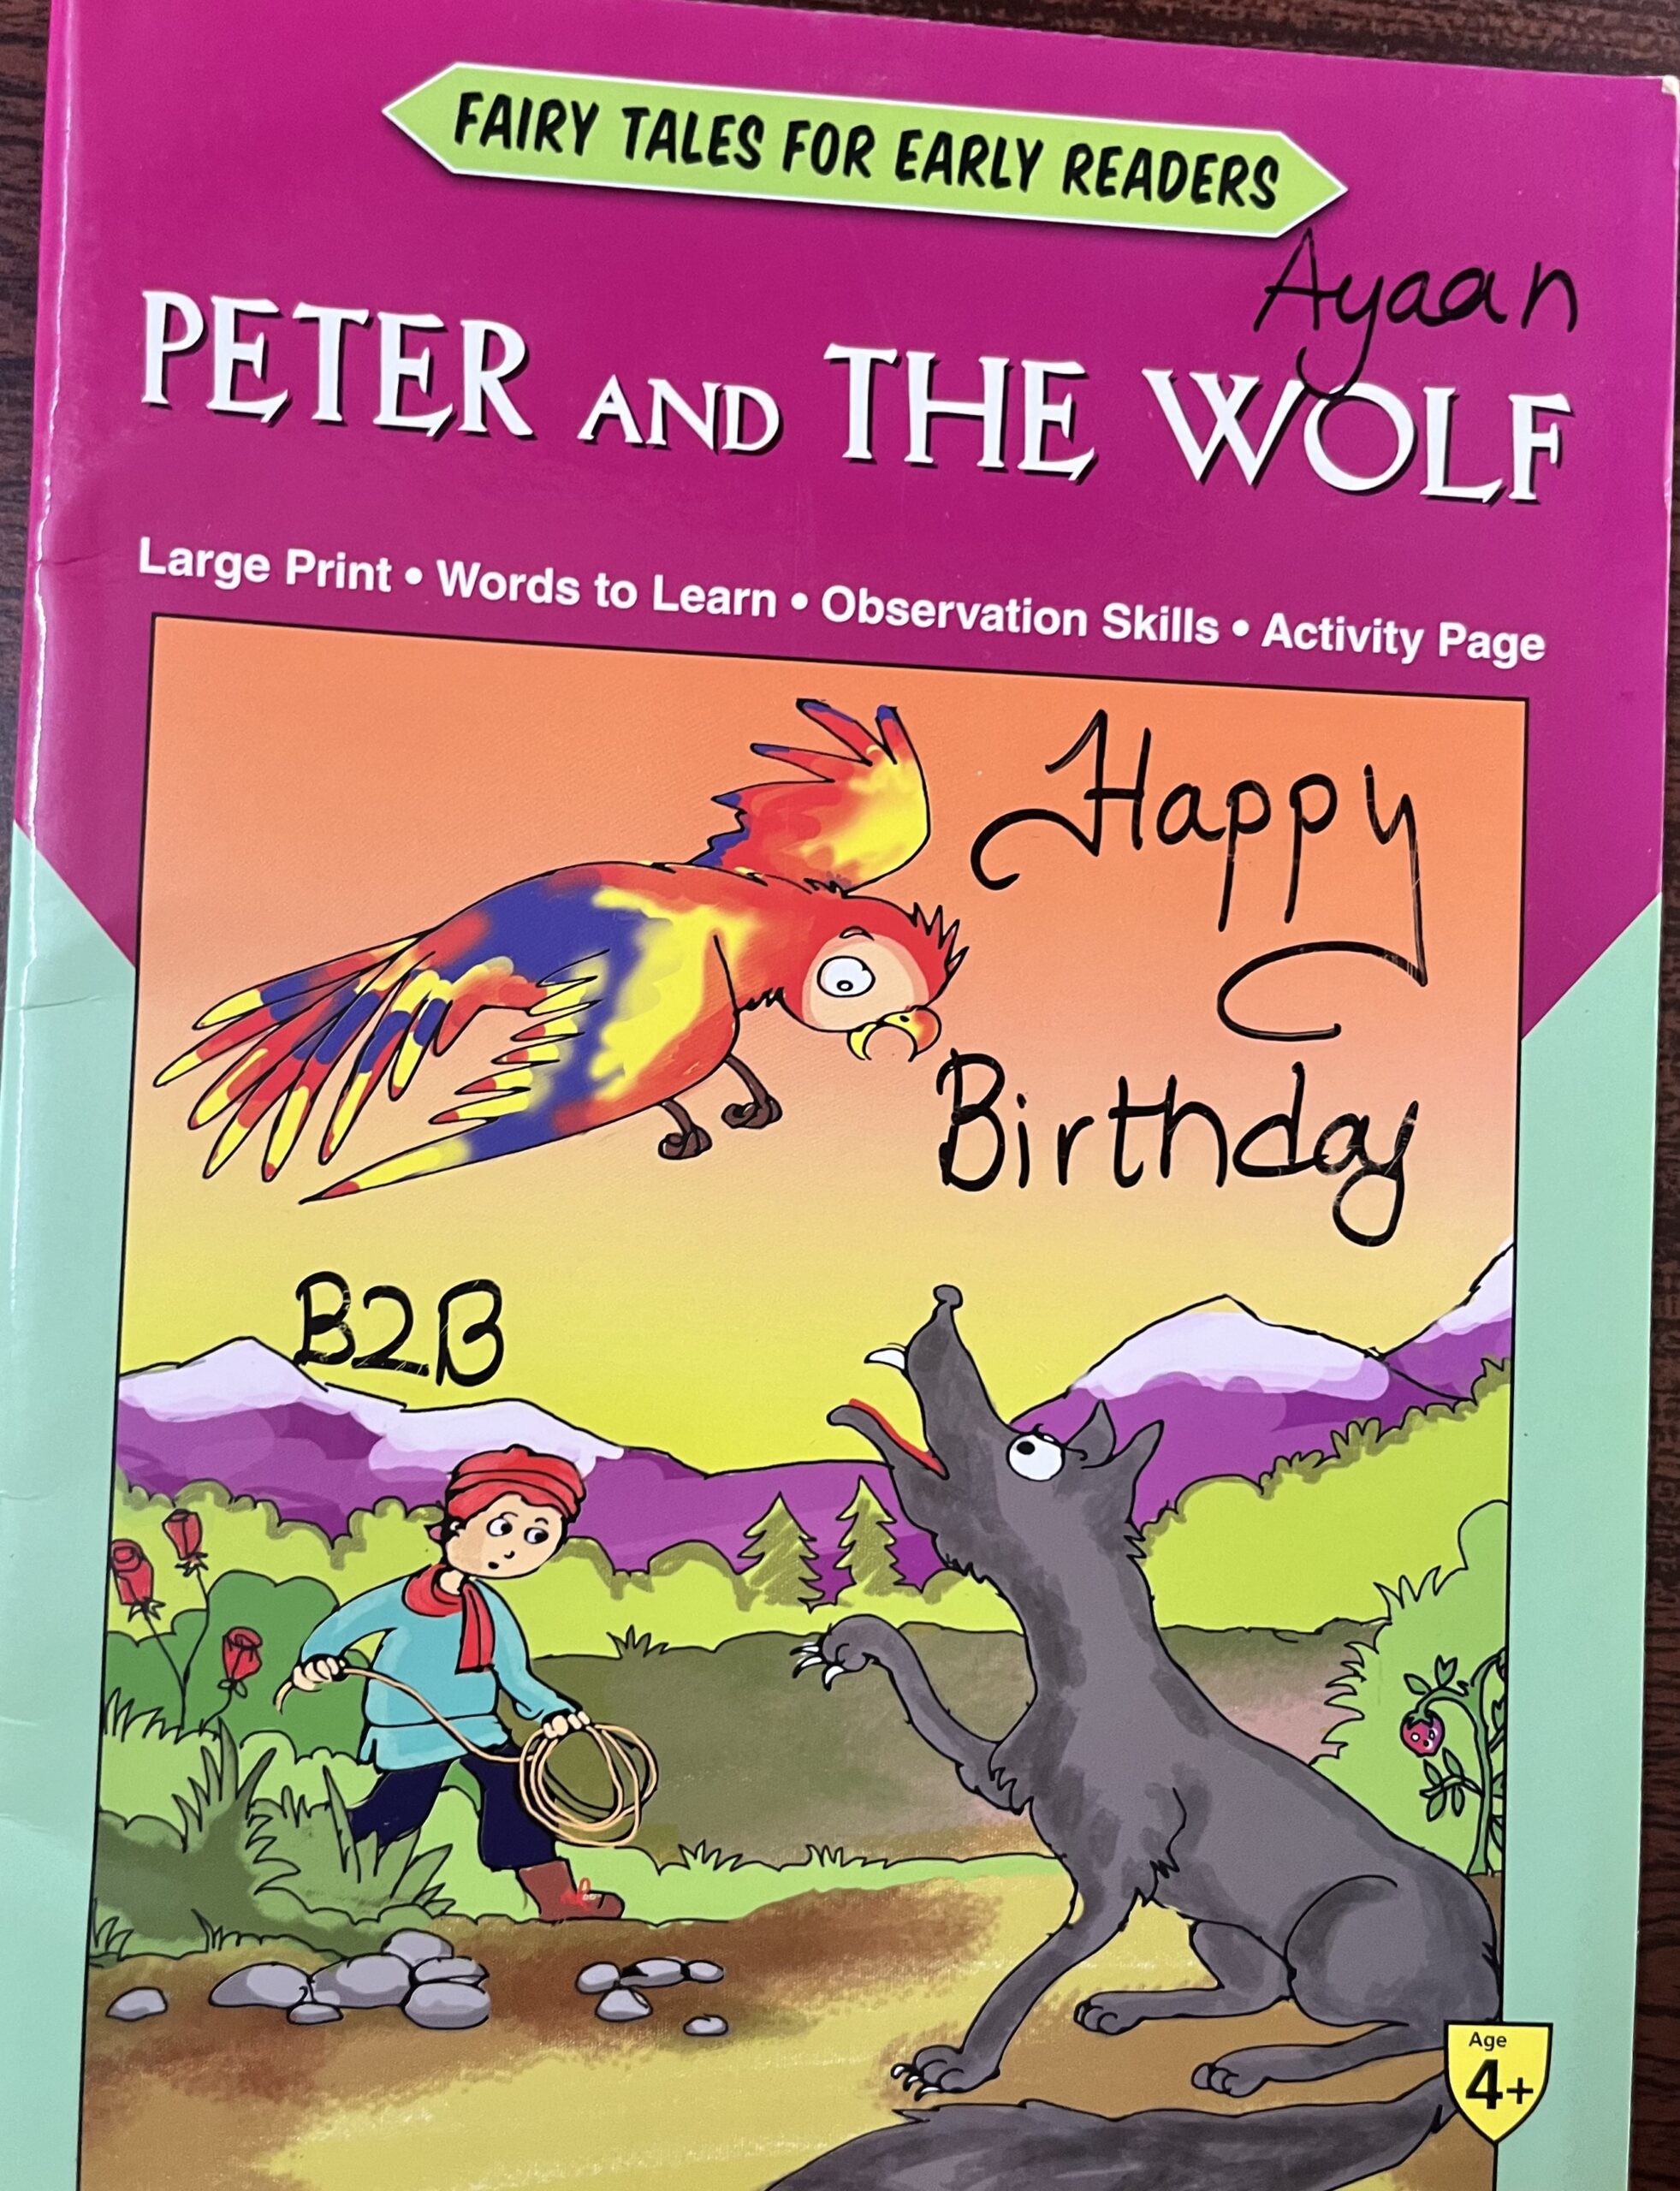 Peter and the wolf